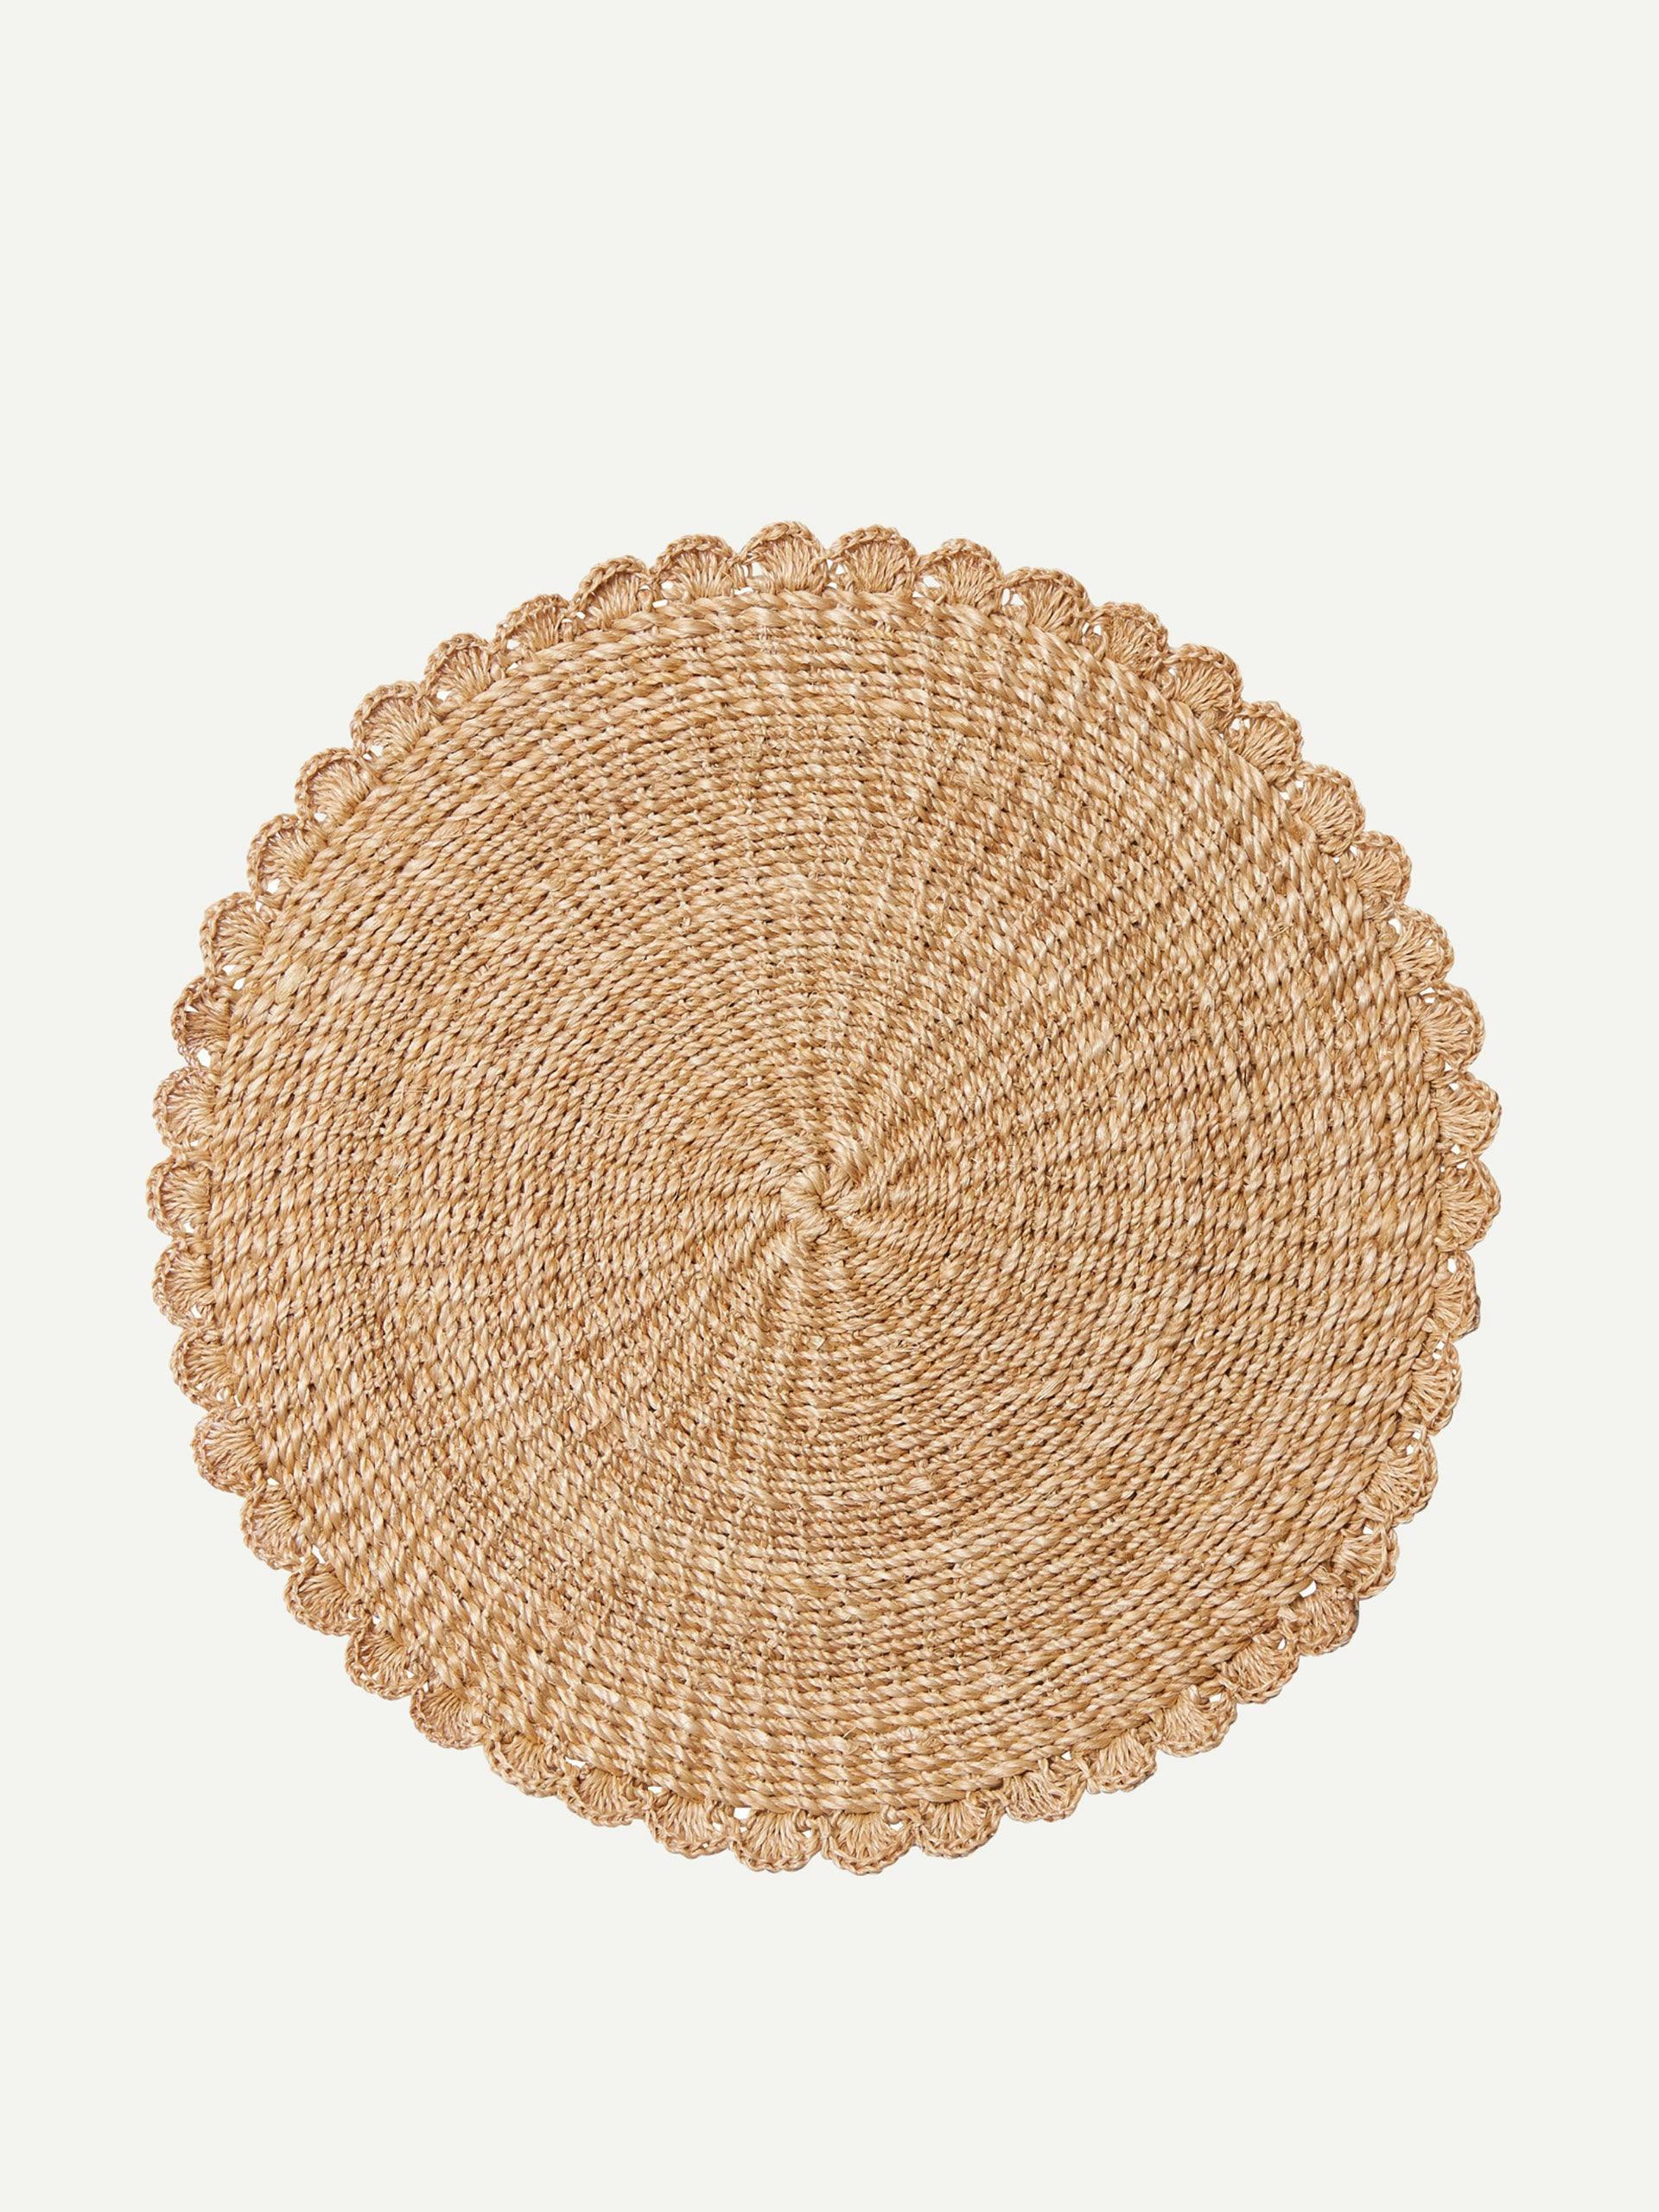 Scalloped natural abaca placemat